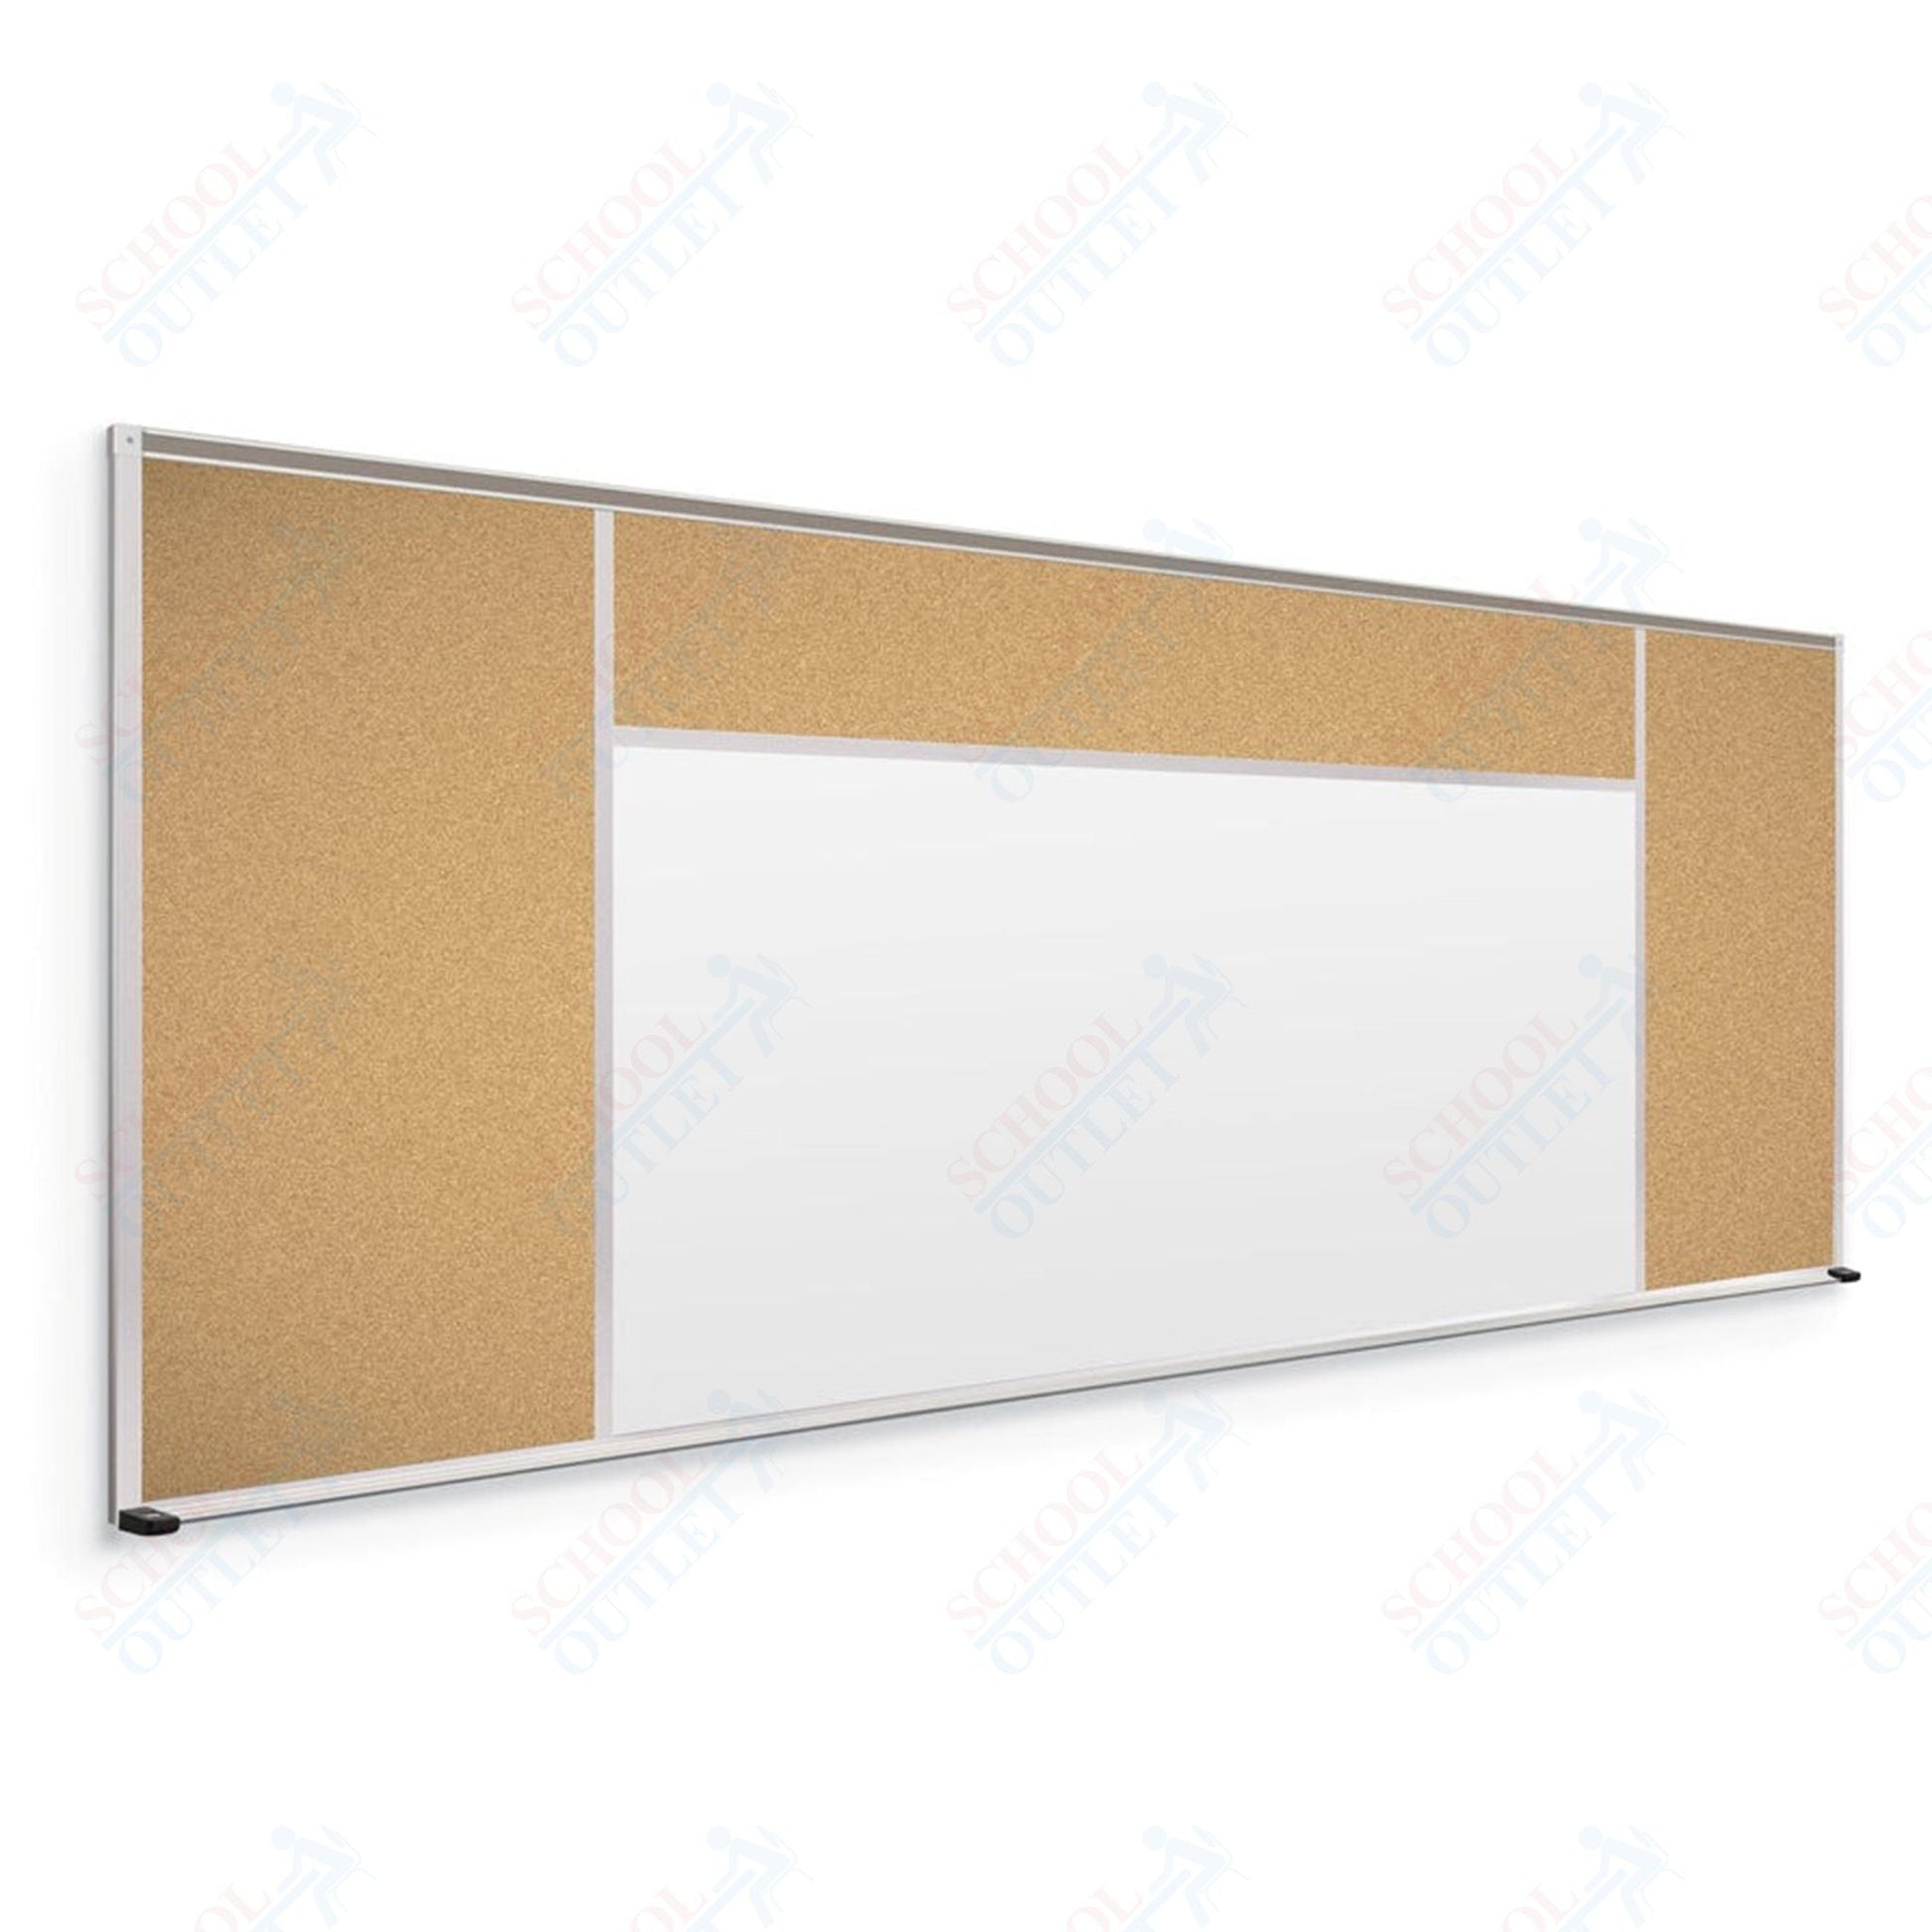 Mooreco Combination Board - Porcelain Steel Markerboard and Natural Cork Tackboard (Type H) - SchoolOutlet